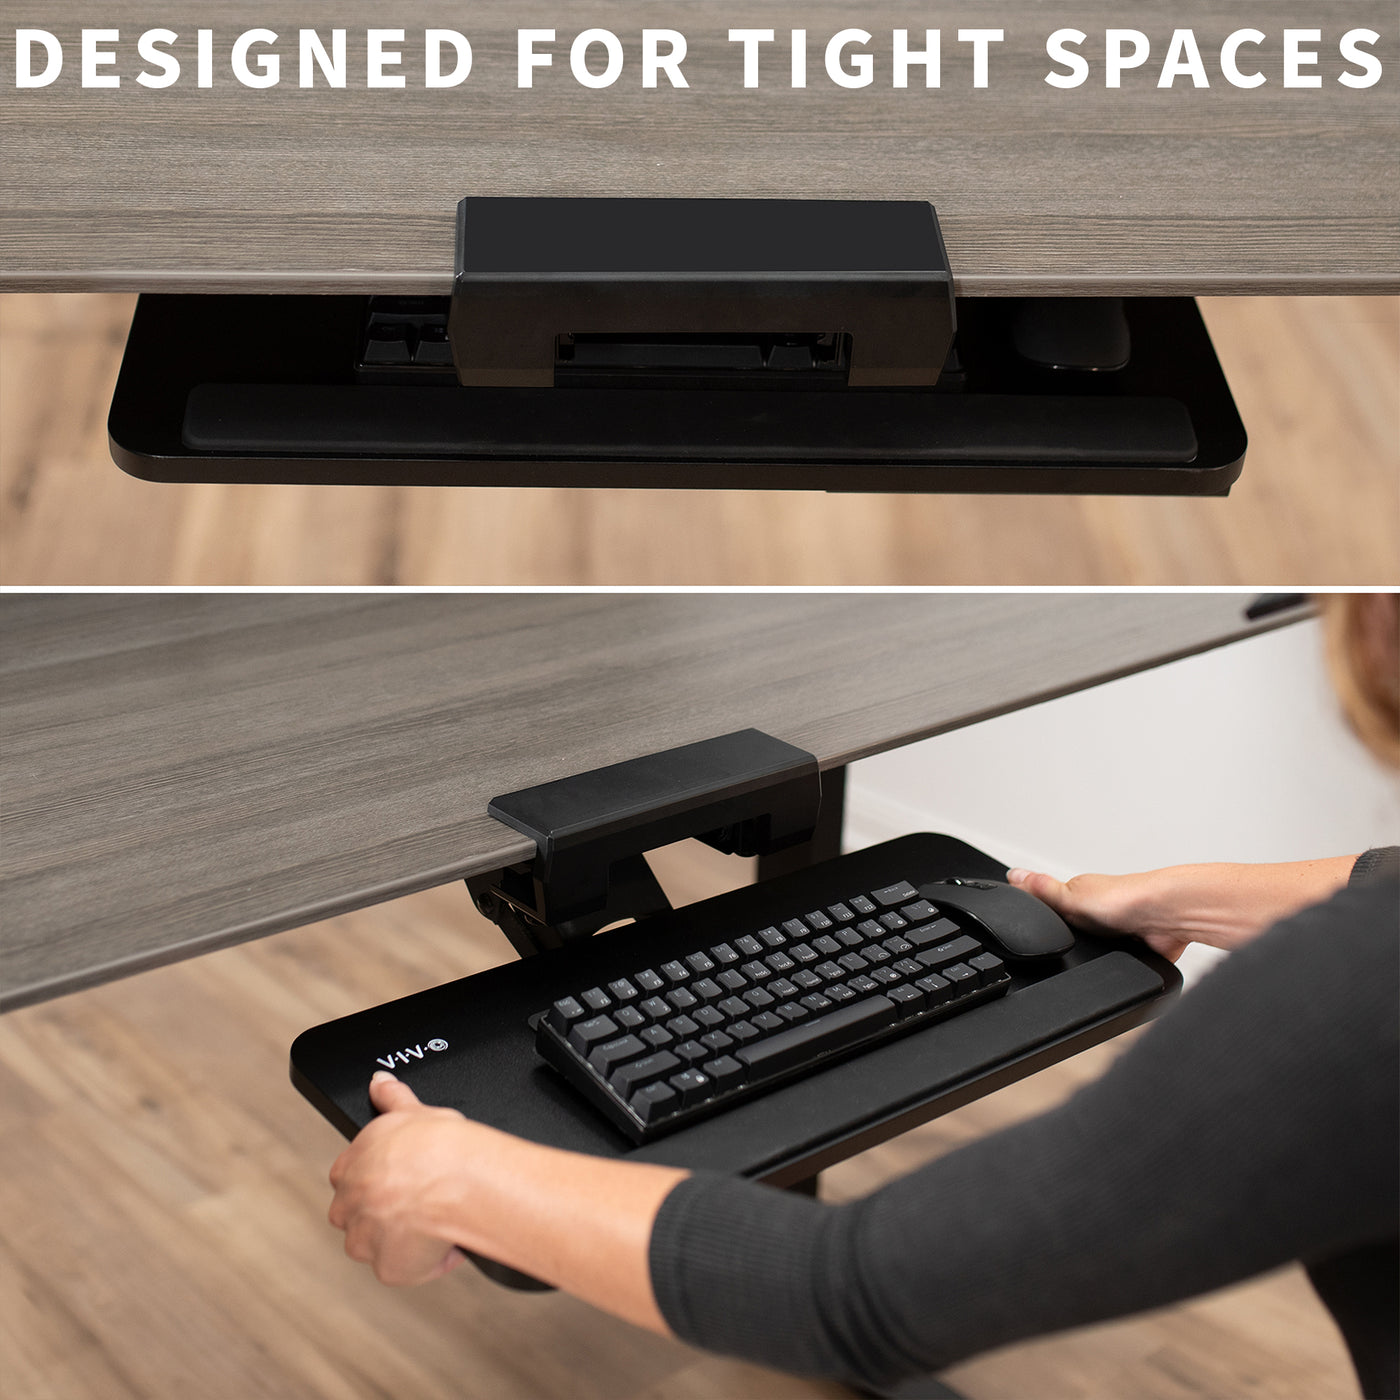 Space efficient adjustable under desk keyboard tray with mousepad.